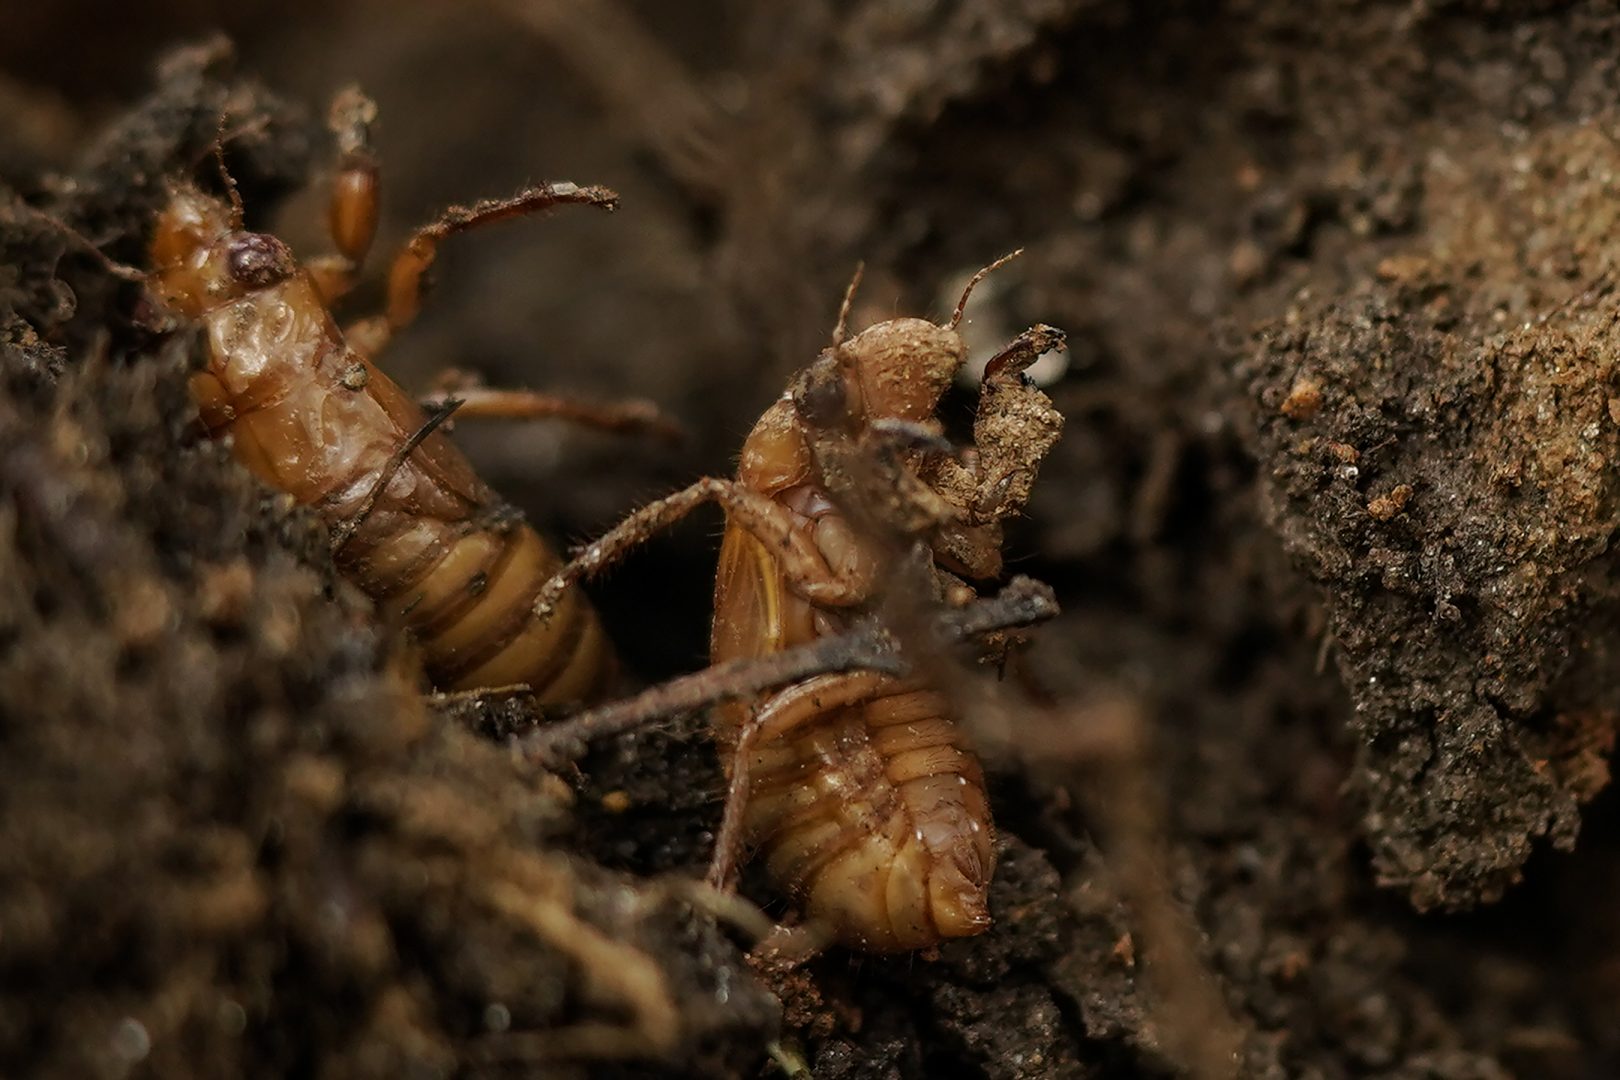 Brood X cicadas are busy and so are the scientists who study them